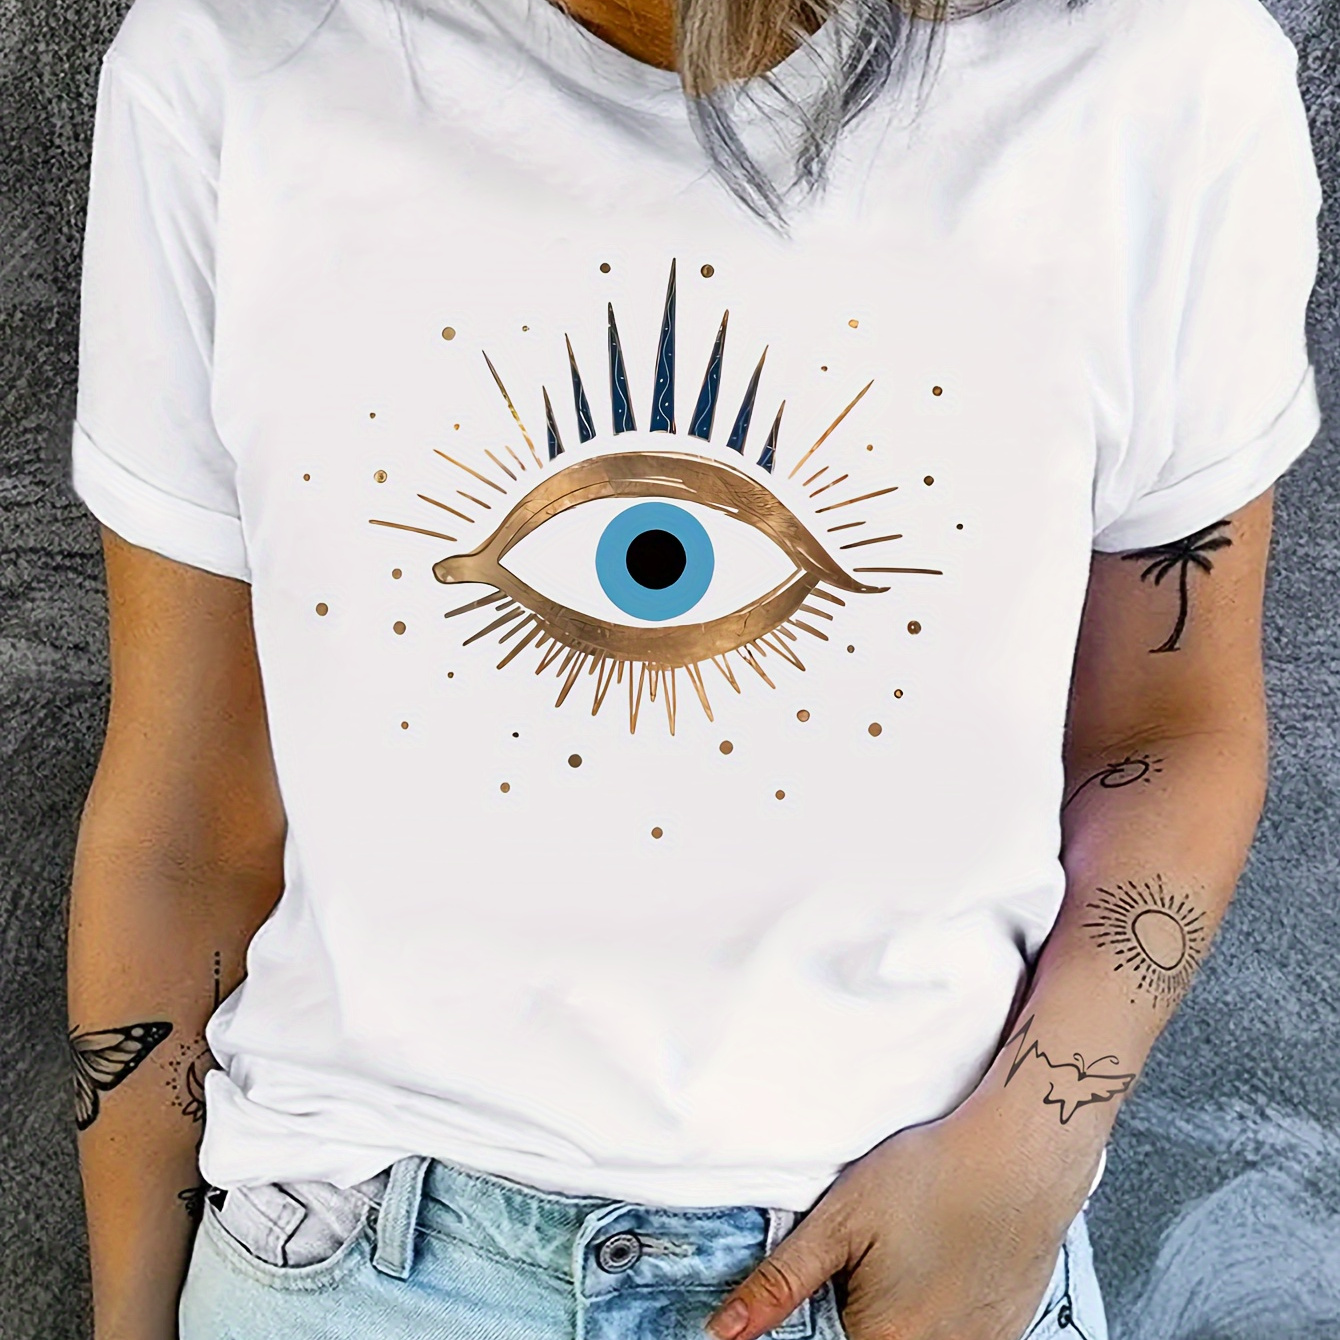 

Evil Eye Graphic Print T-shirt, Short Sleeve Crew Neck Casual Top For Summer & Spring, Women's Clothing